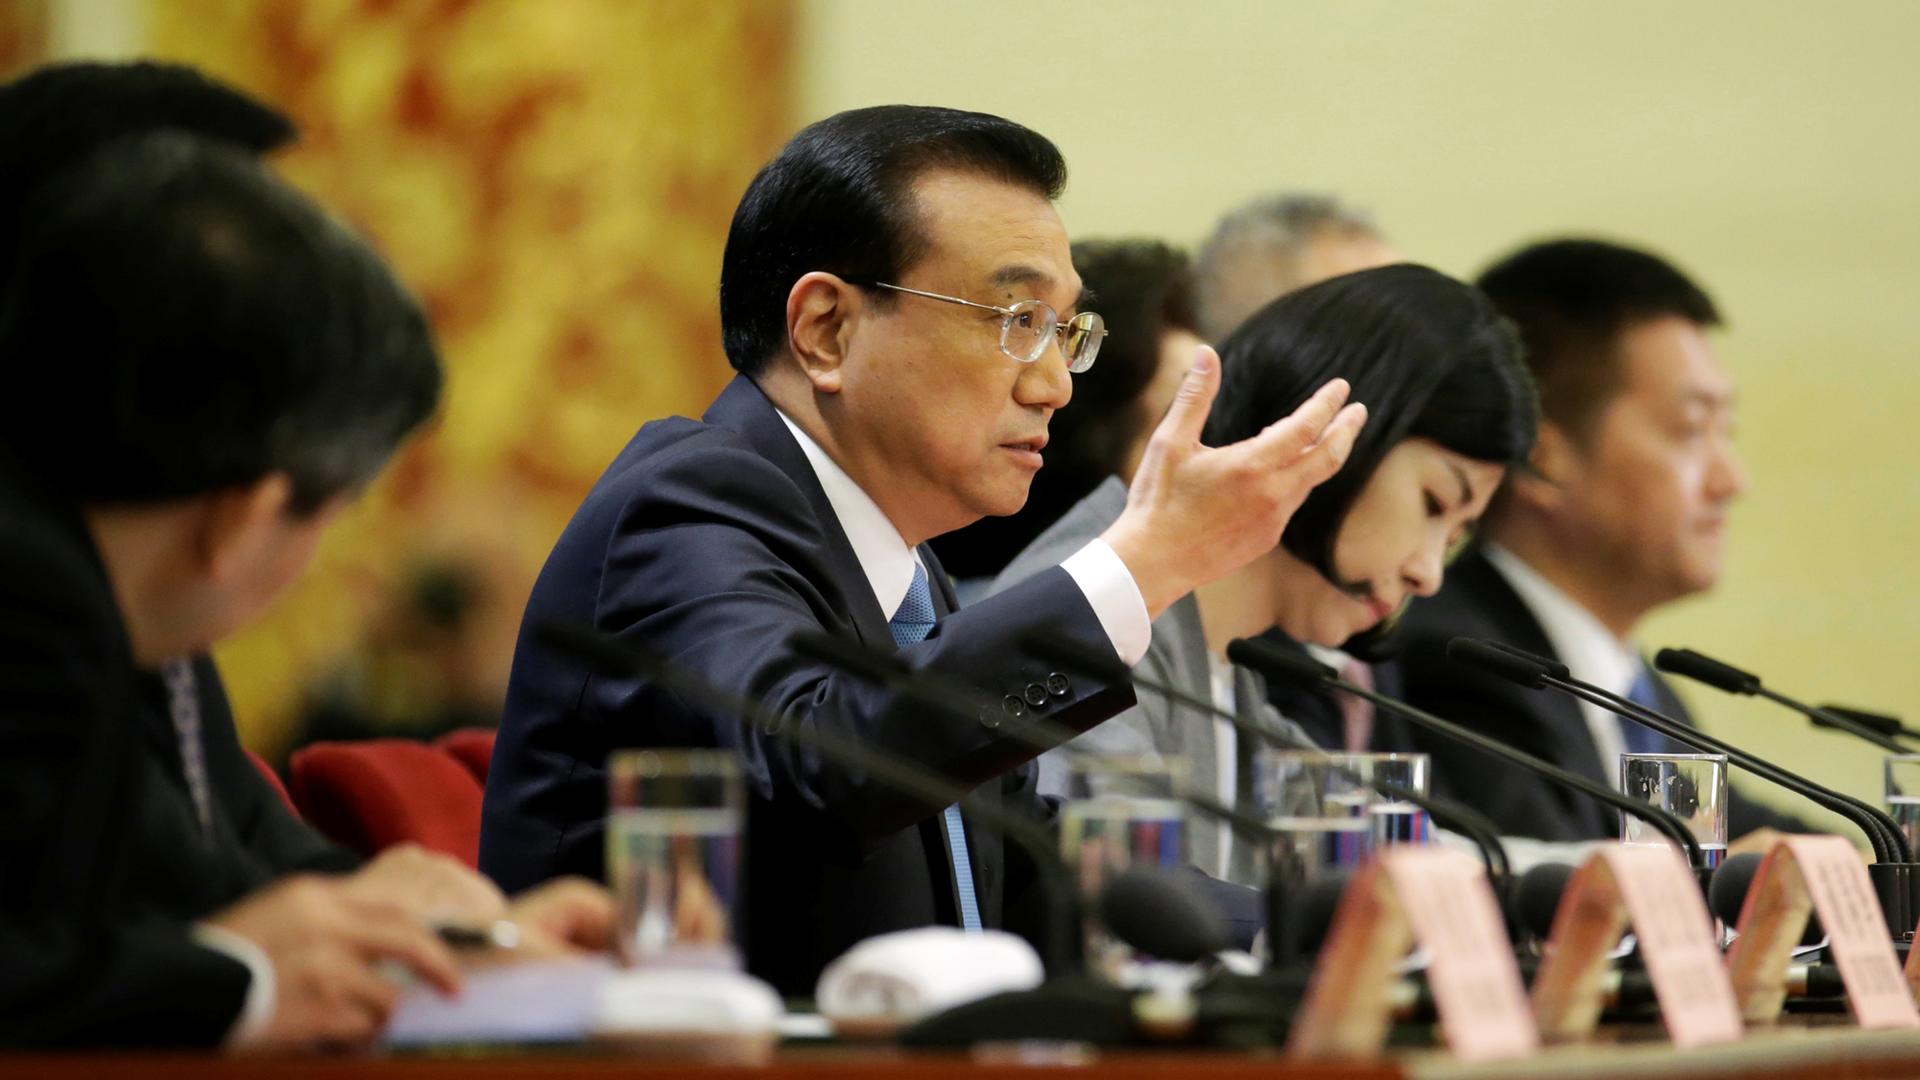 Chinese Premier Li Keqiang speaks at a table lined with microphones during a news conference in Beijing.